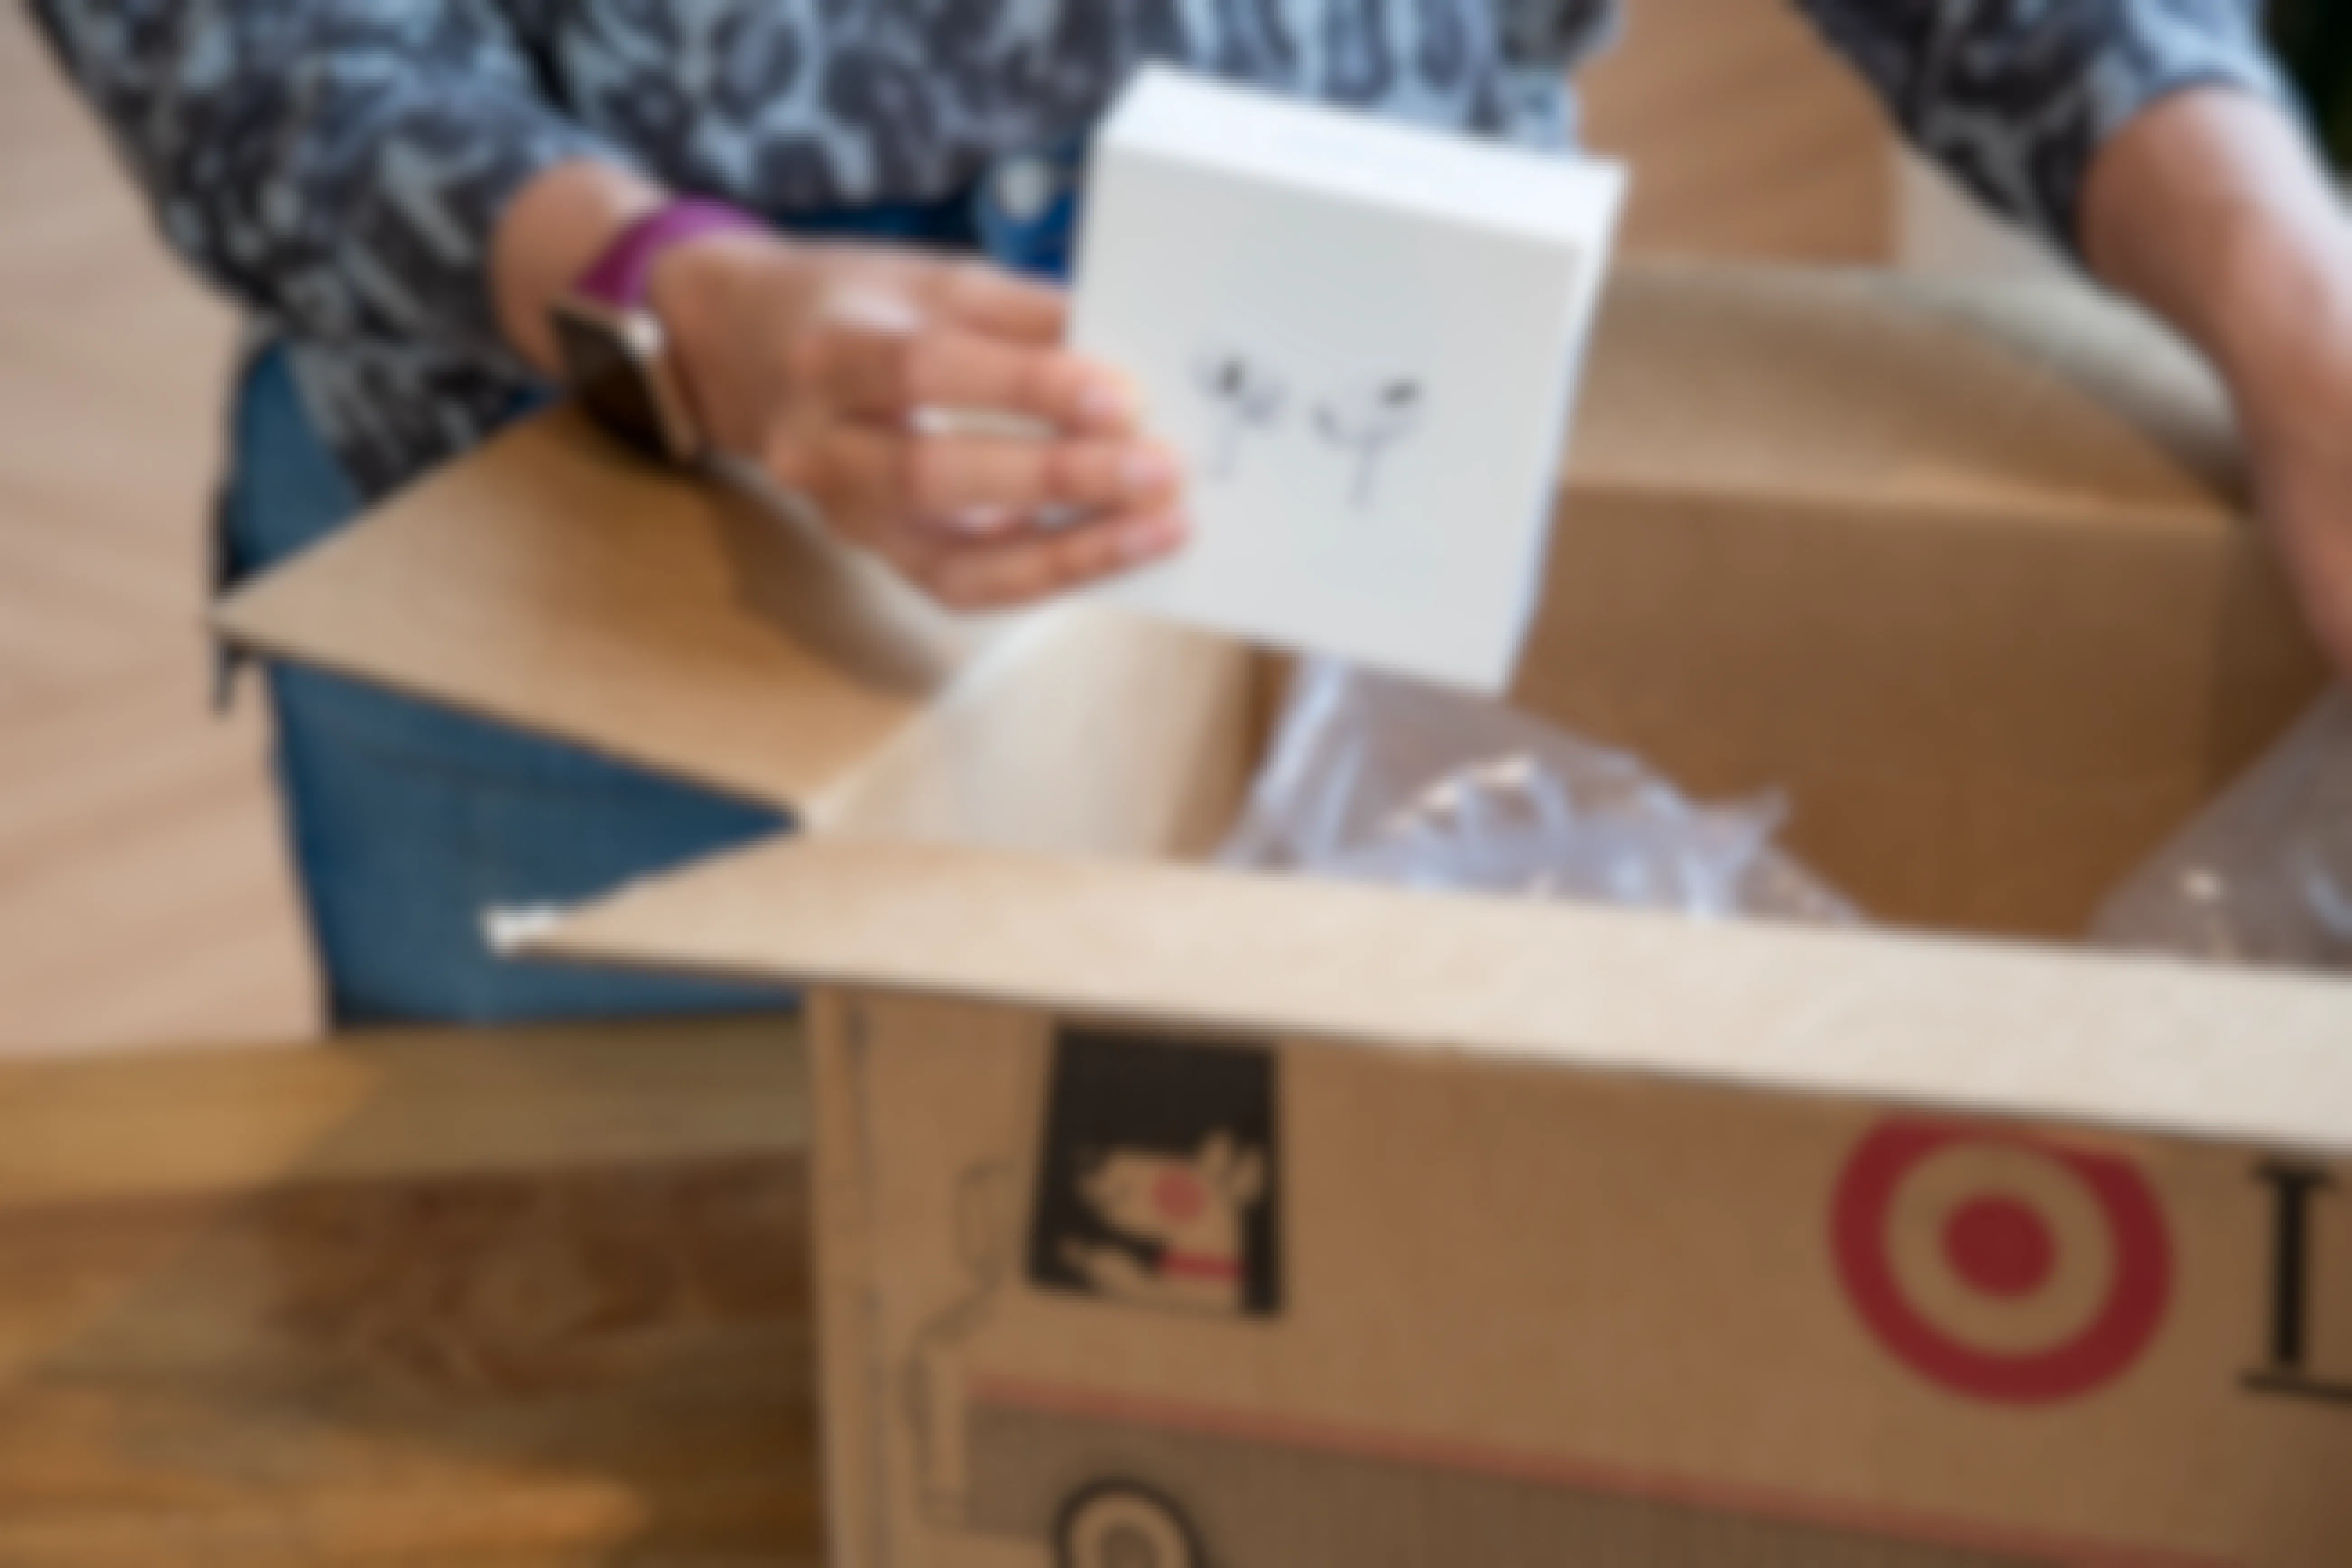 A person's hand pulling a box of airpods out of a Target delivery box.